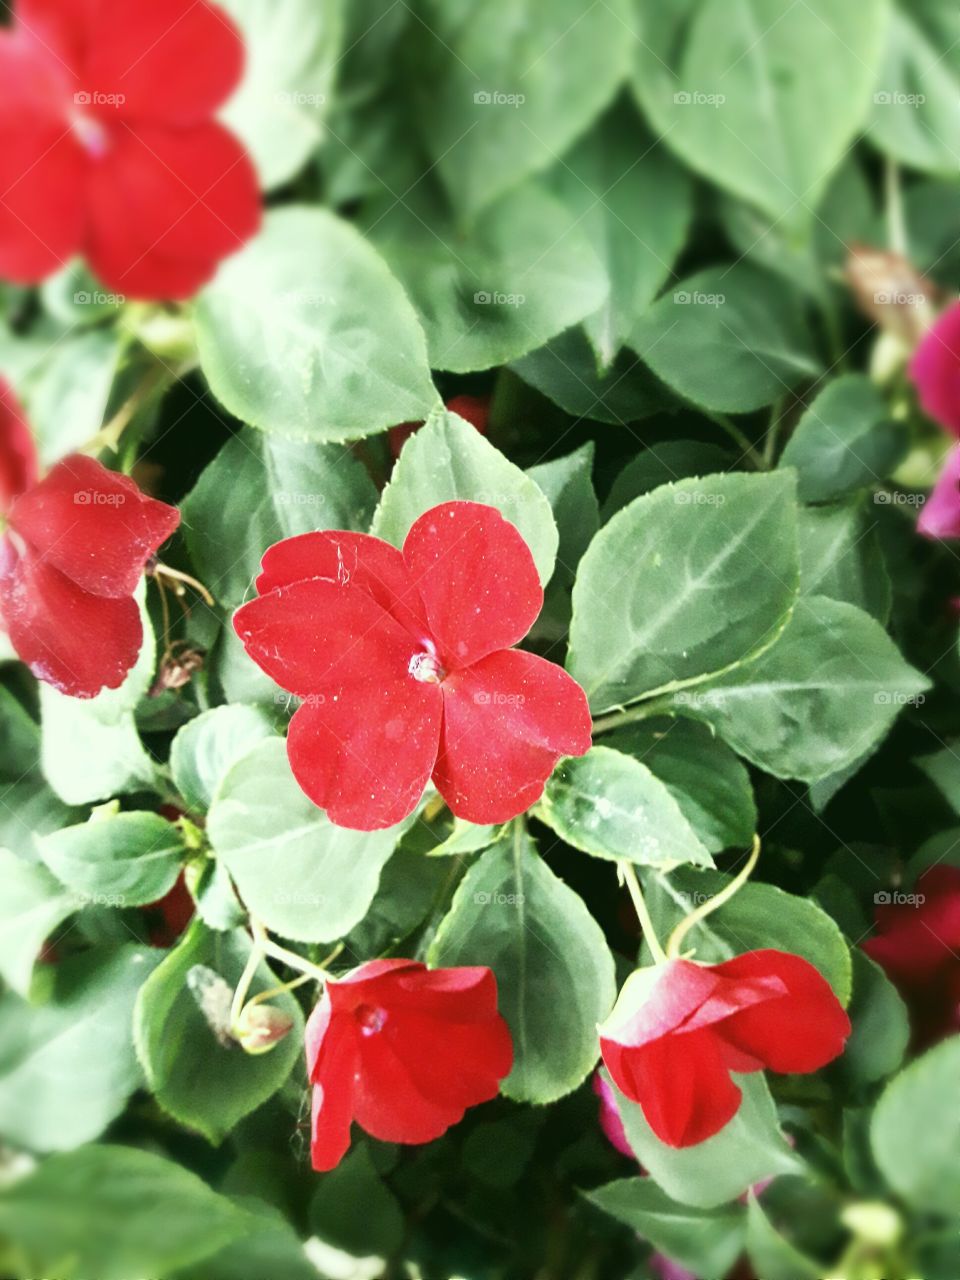 Red colour season flower with green leaf.